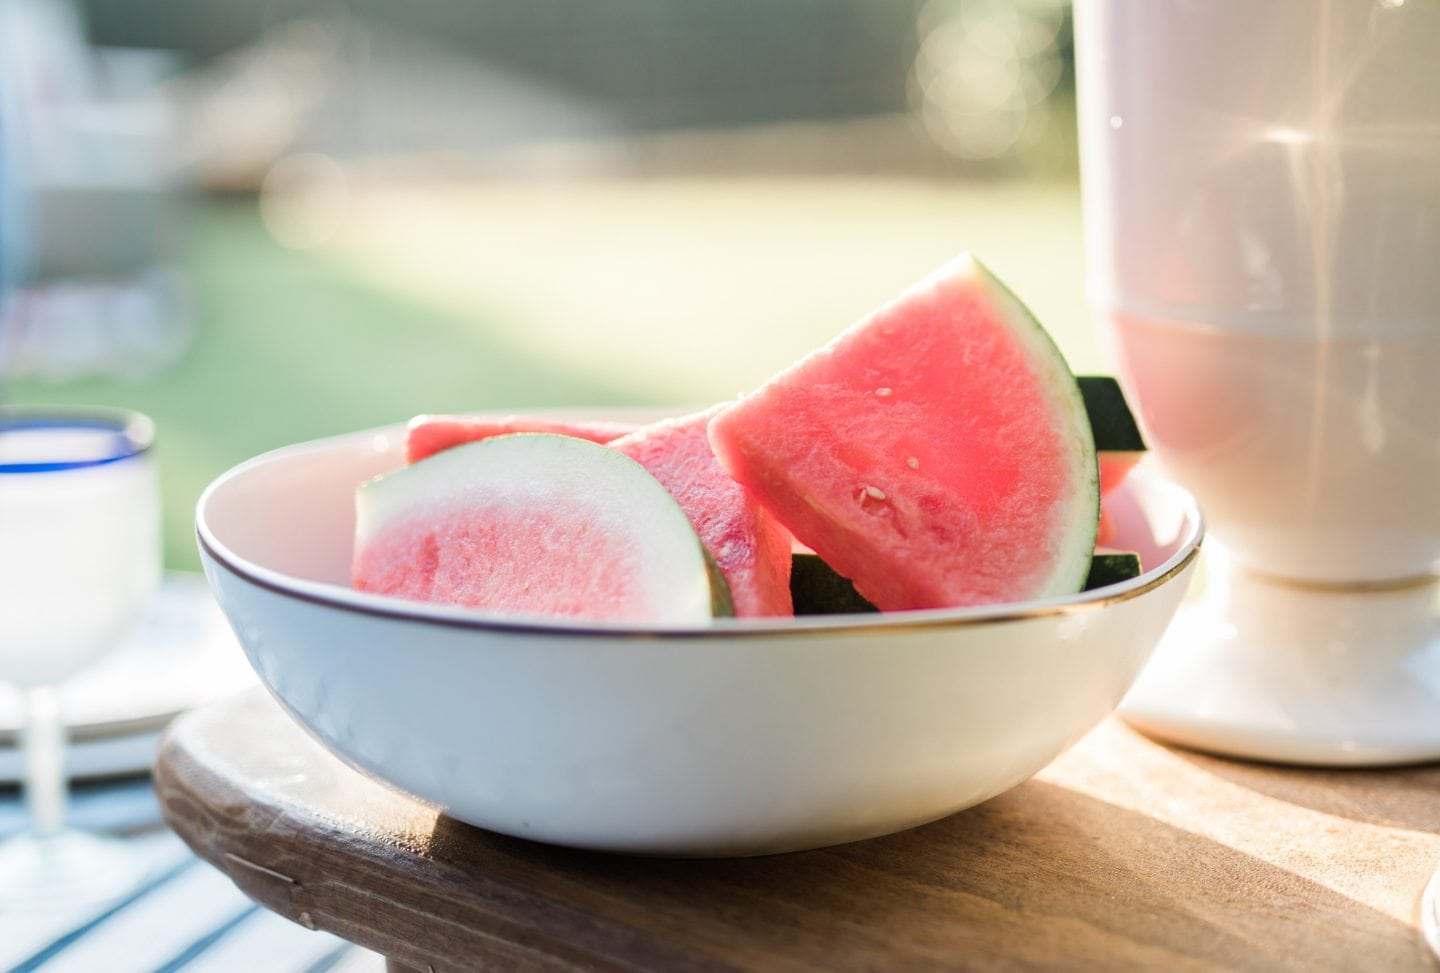 Sliced watermelon in white bowl with gold rim.